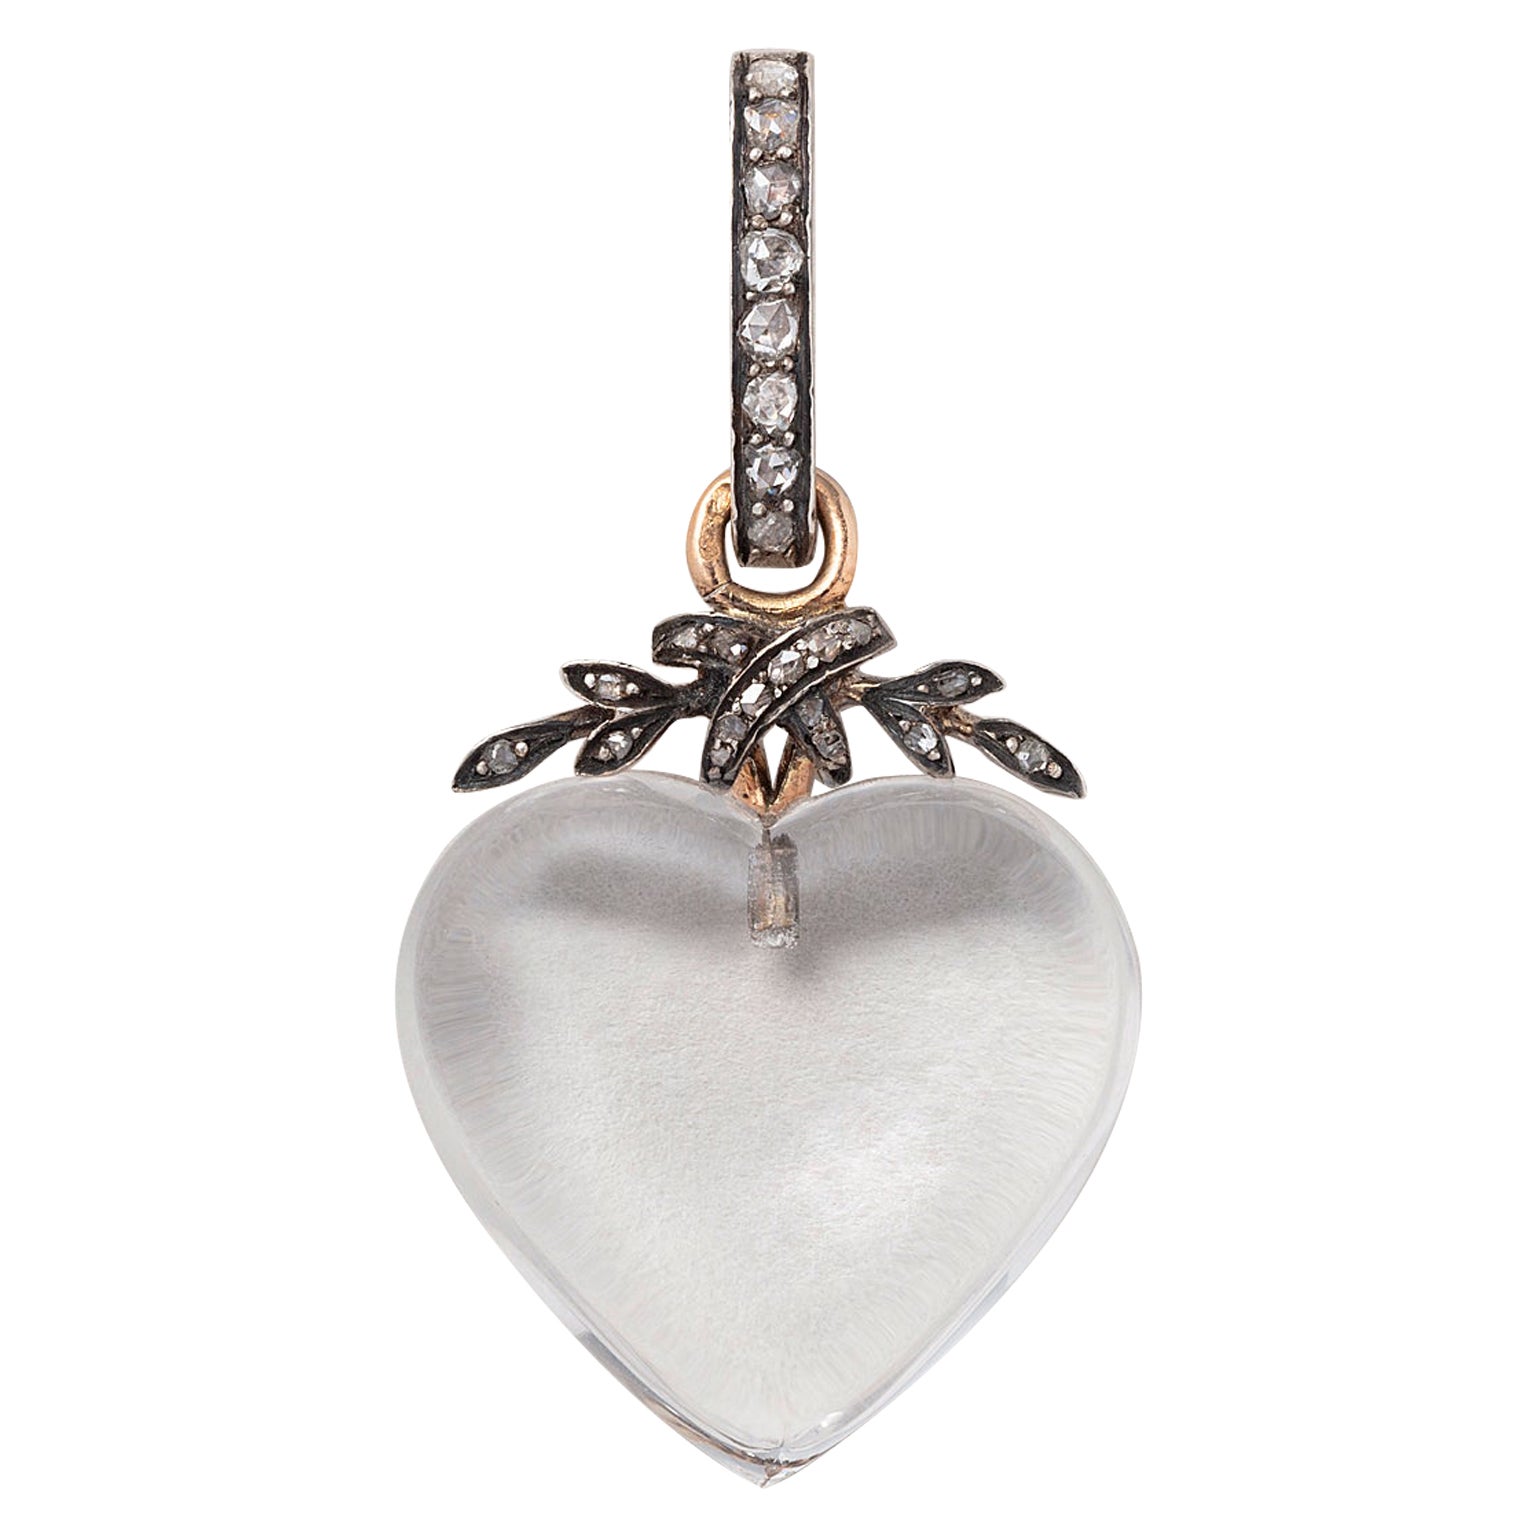 An Antique Gold and Silver Heart Pendant with Rock Crystal and diamondsDiamond